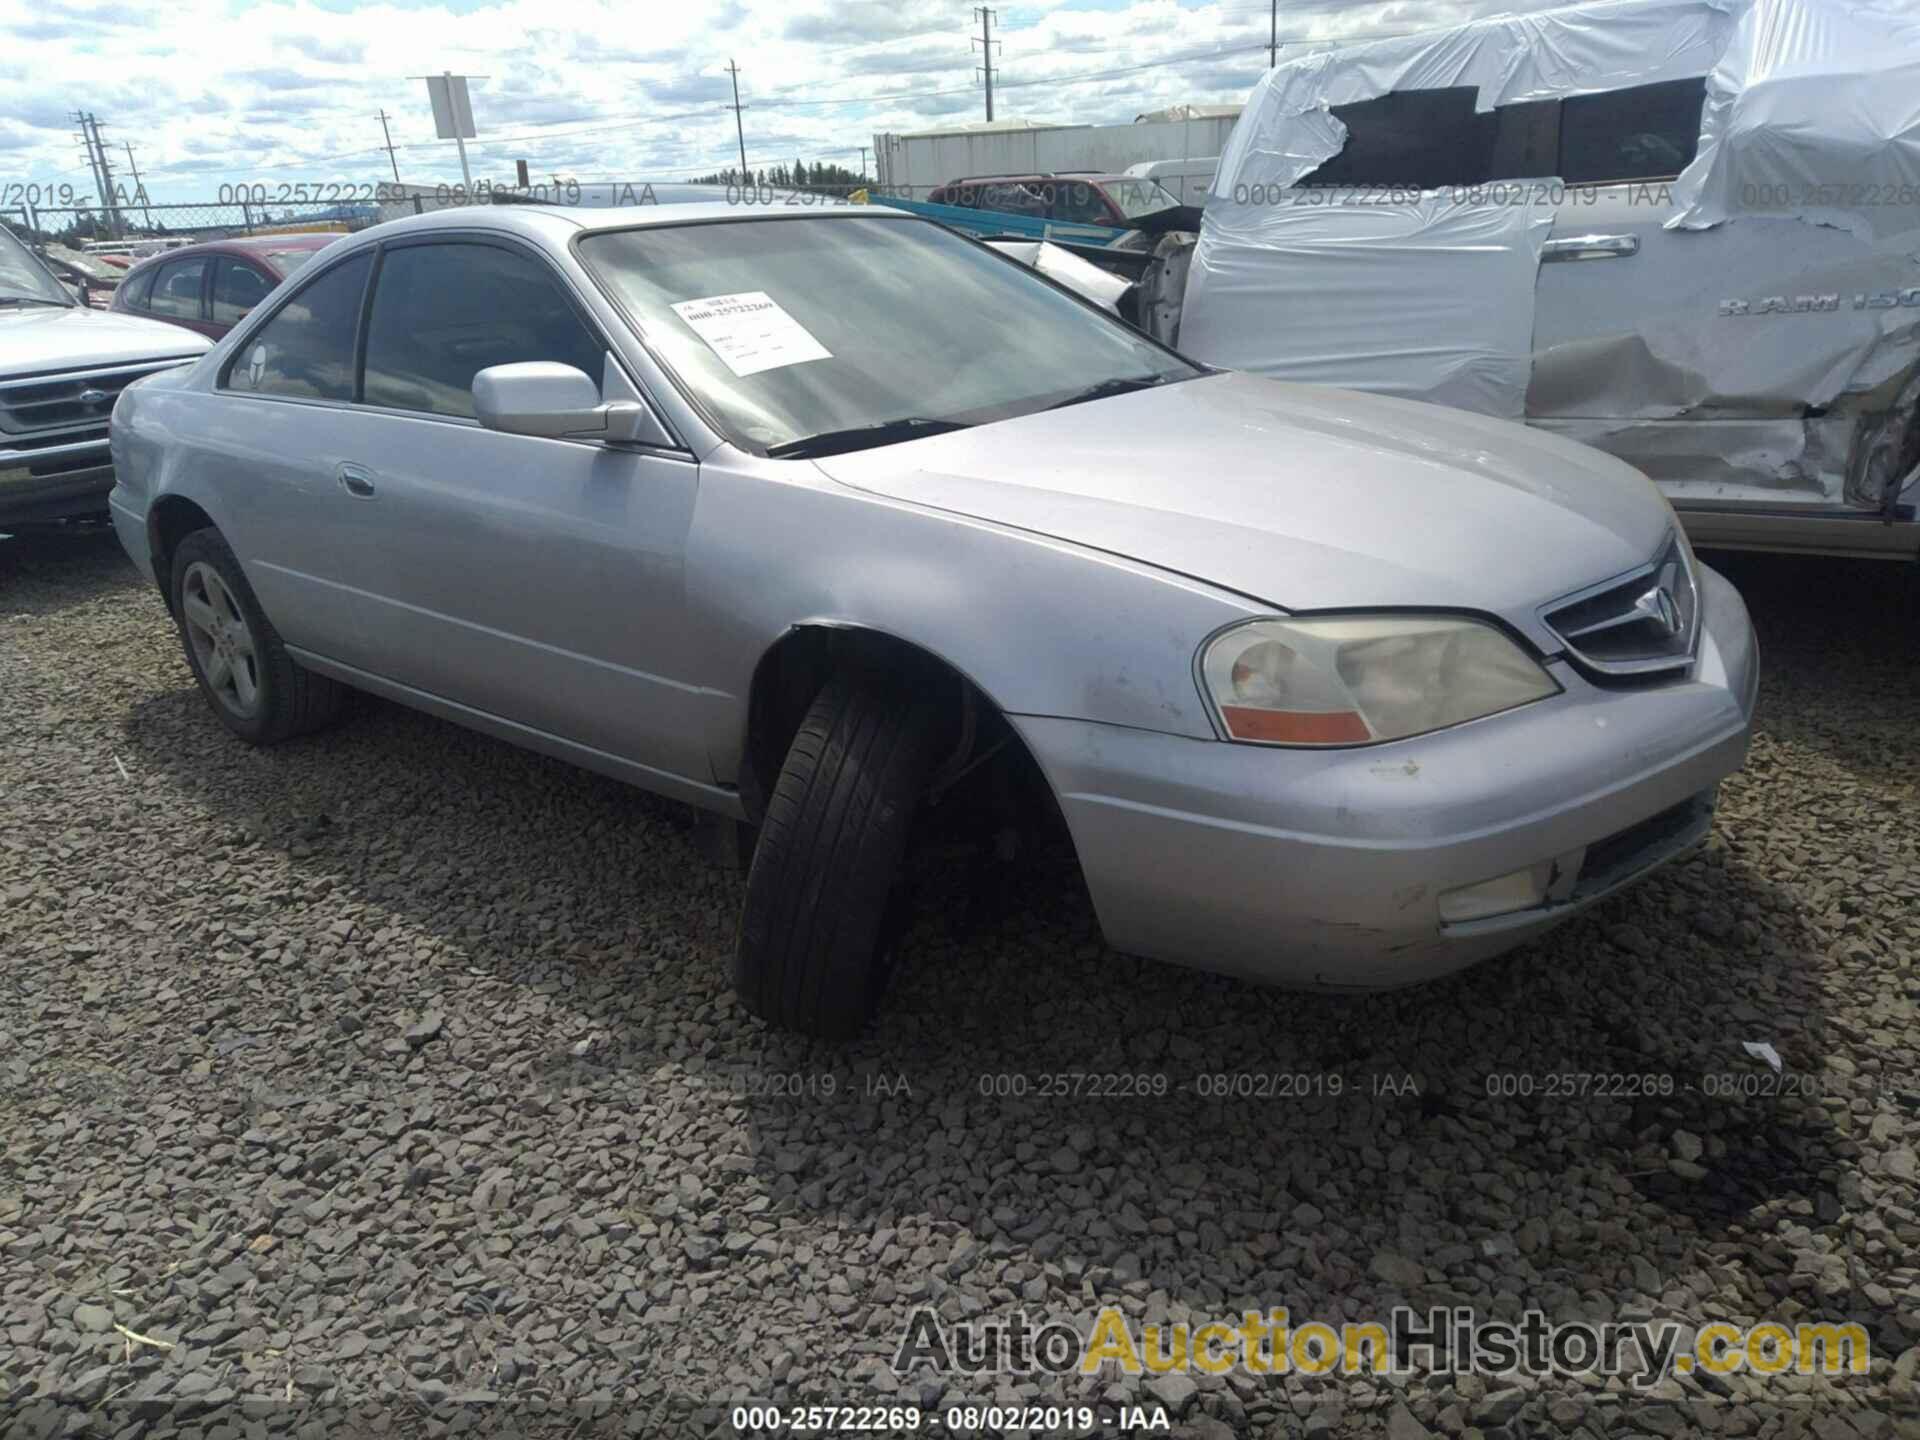 Acura 3.2CL TYPE-S, 19UYA42642A000431